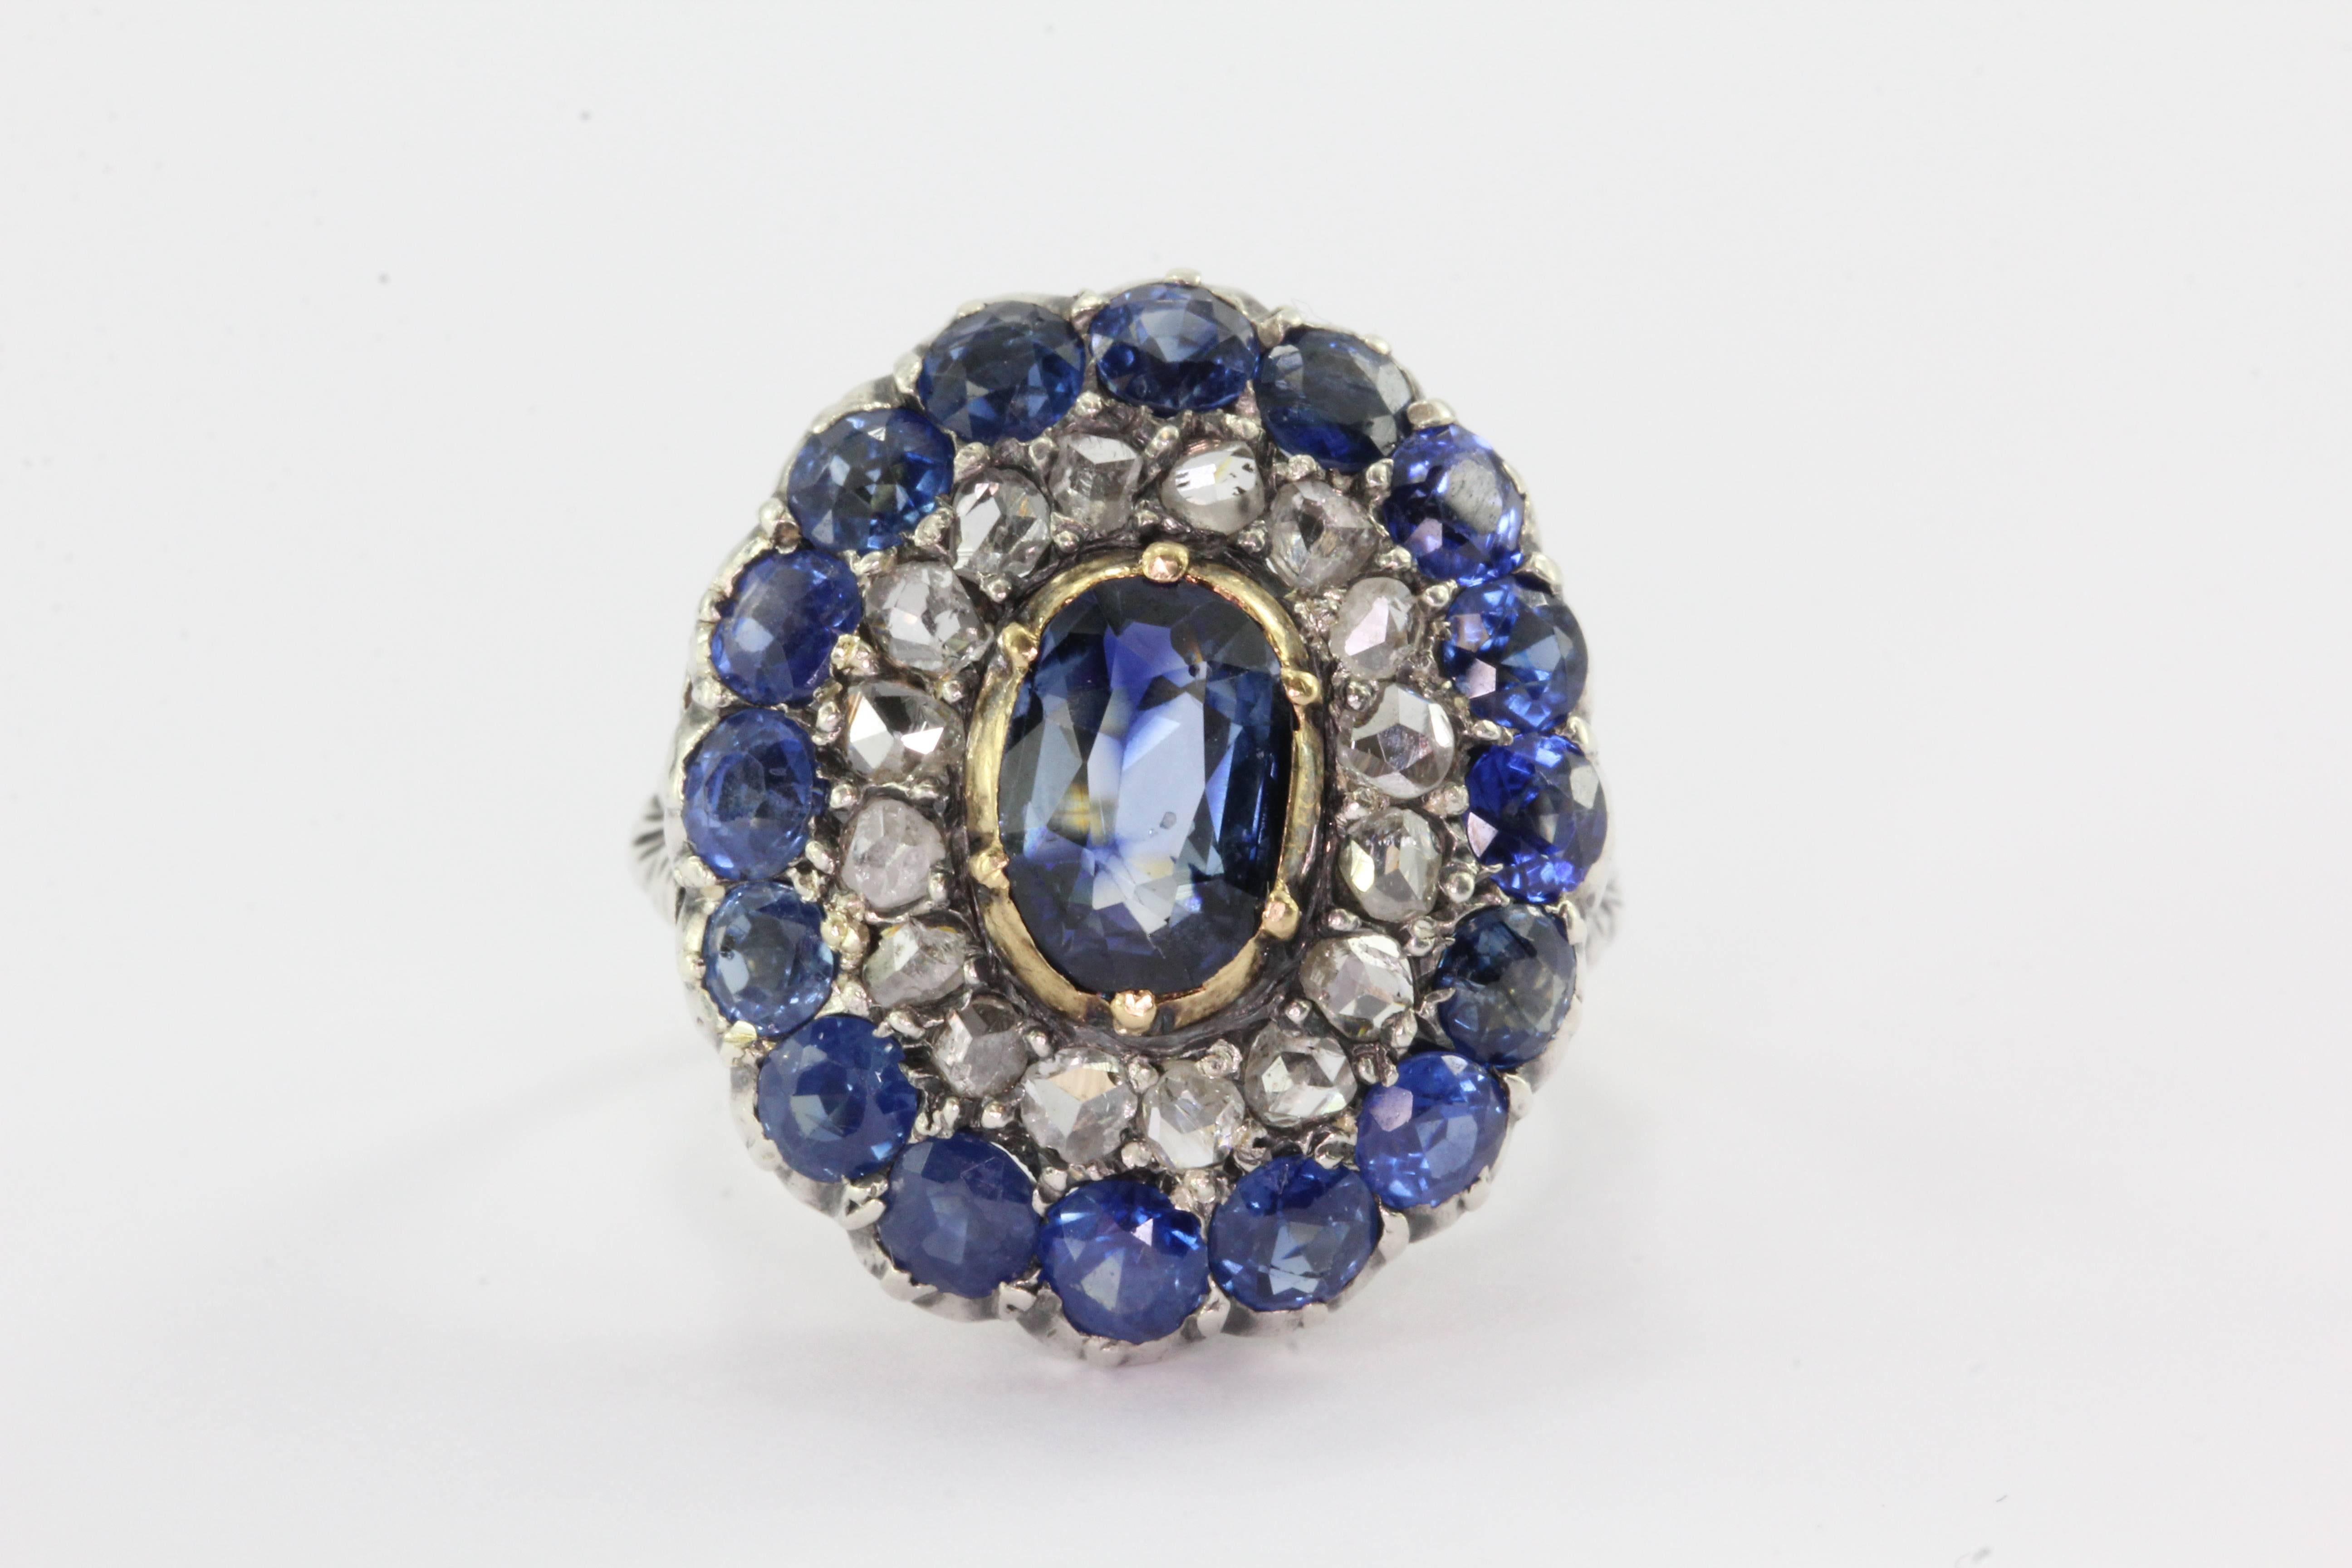 18K Gold Silver Top Blue Sapphire Rose Cut Diamond Ring. The ring is in excellent estate condition and ready to wear. Most of the ring is 18k yellow gold but the top is sterling silver. The center sapphire is approximately 1 carats with an